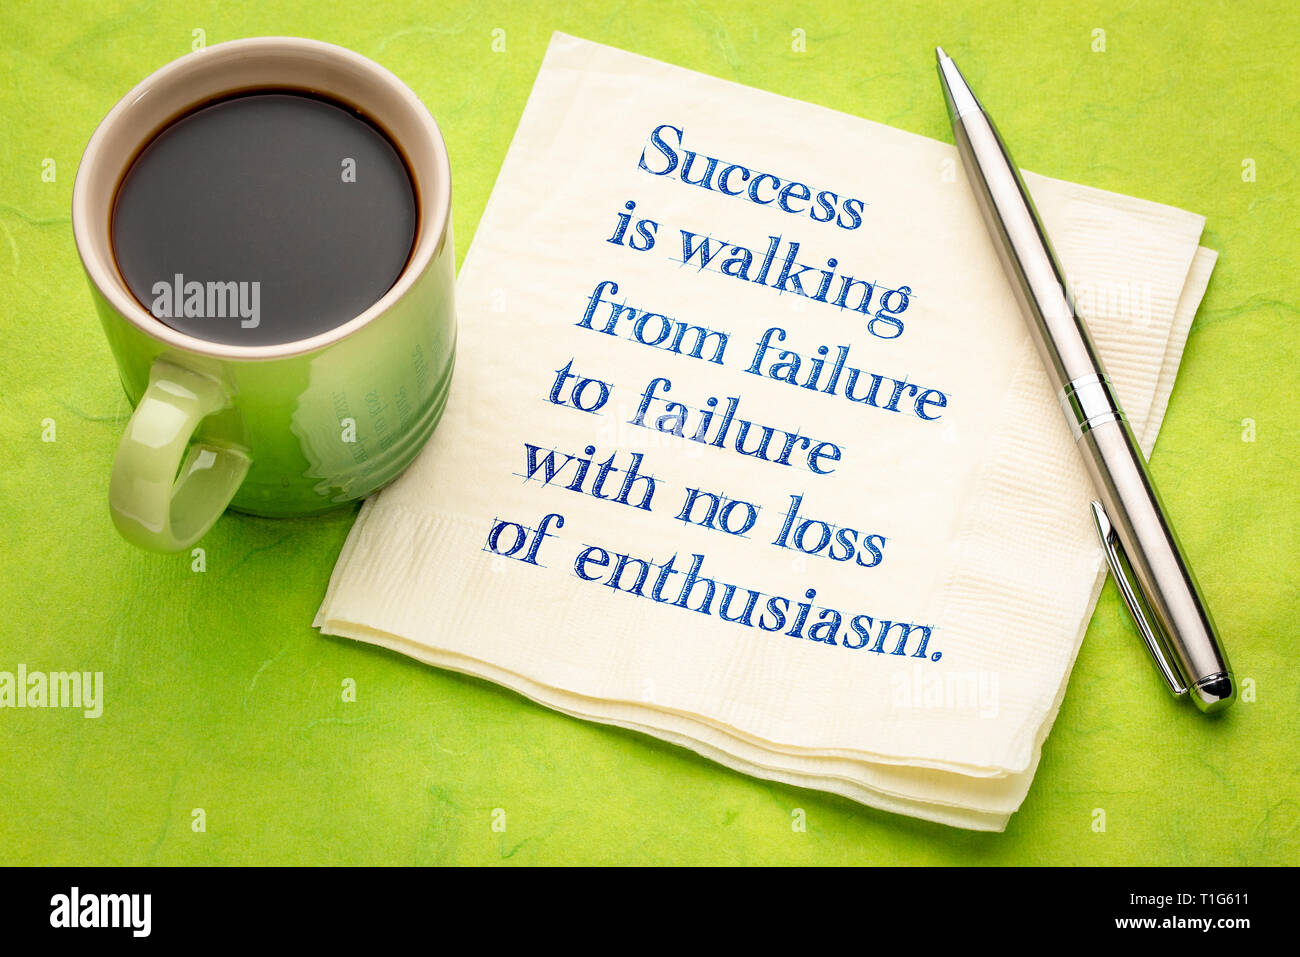 success is walking from failure to failure withi no loss of enthusiasm - handwriting on a napkin with a cup of coffee Stock Photo